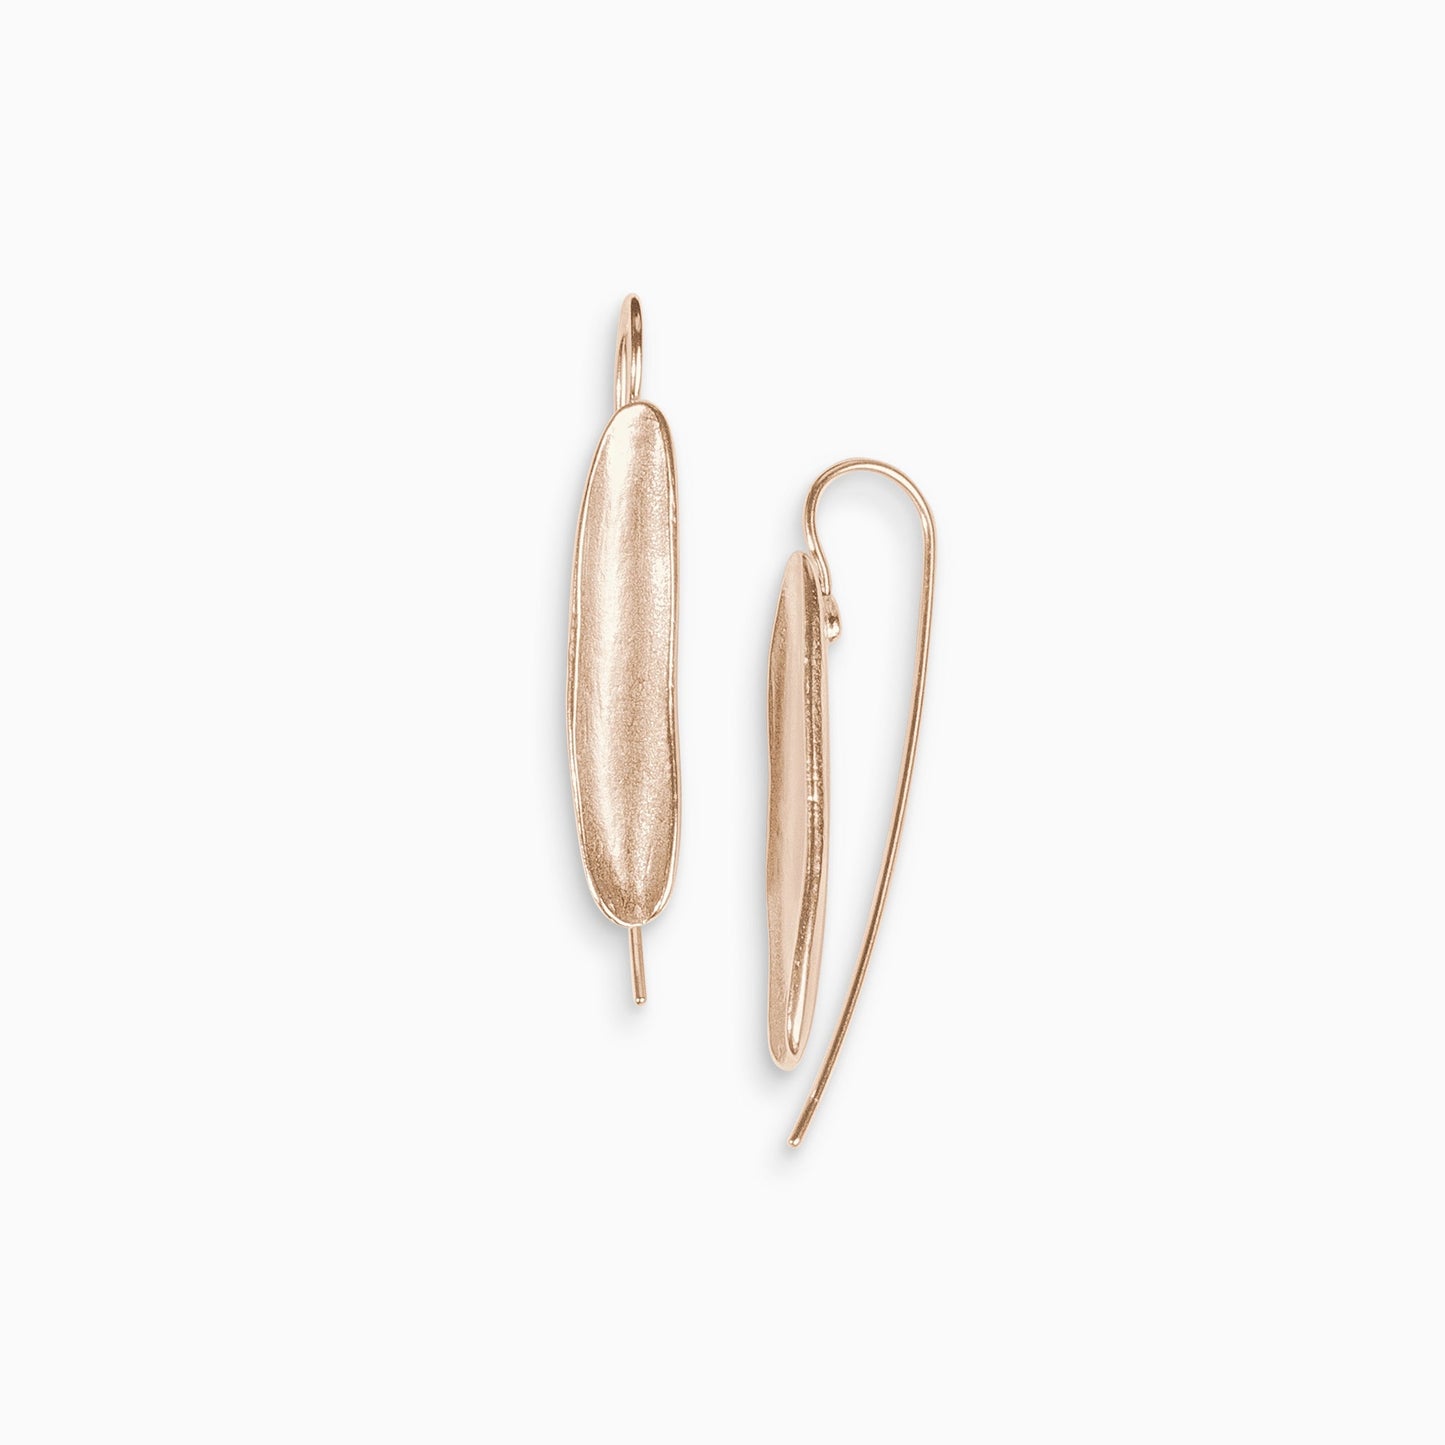 A pair of 18ct Fairtrade rose gold concave long oval shaped earrings with a hook fastening. Satin finish. 35mm length, 6mm width